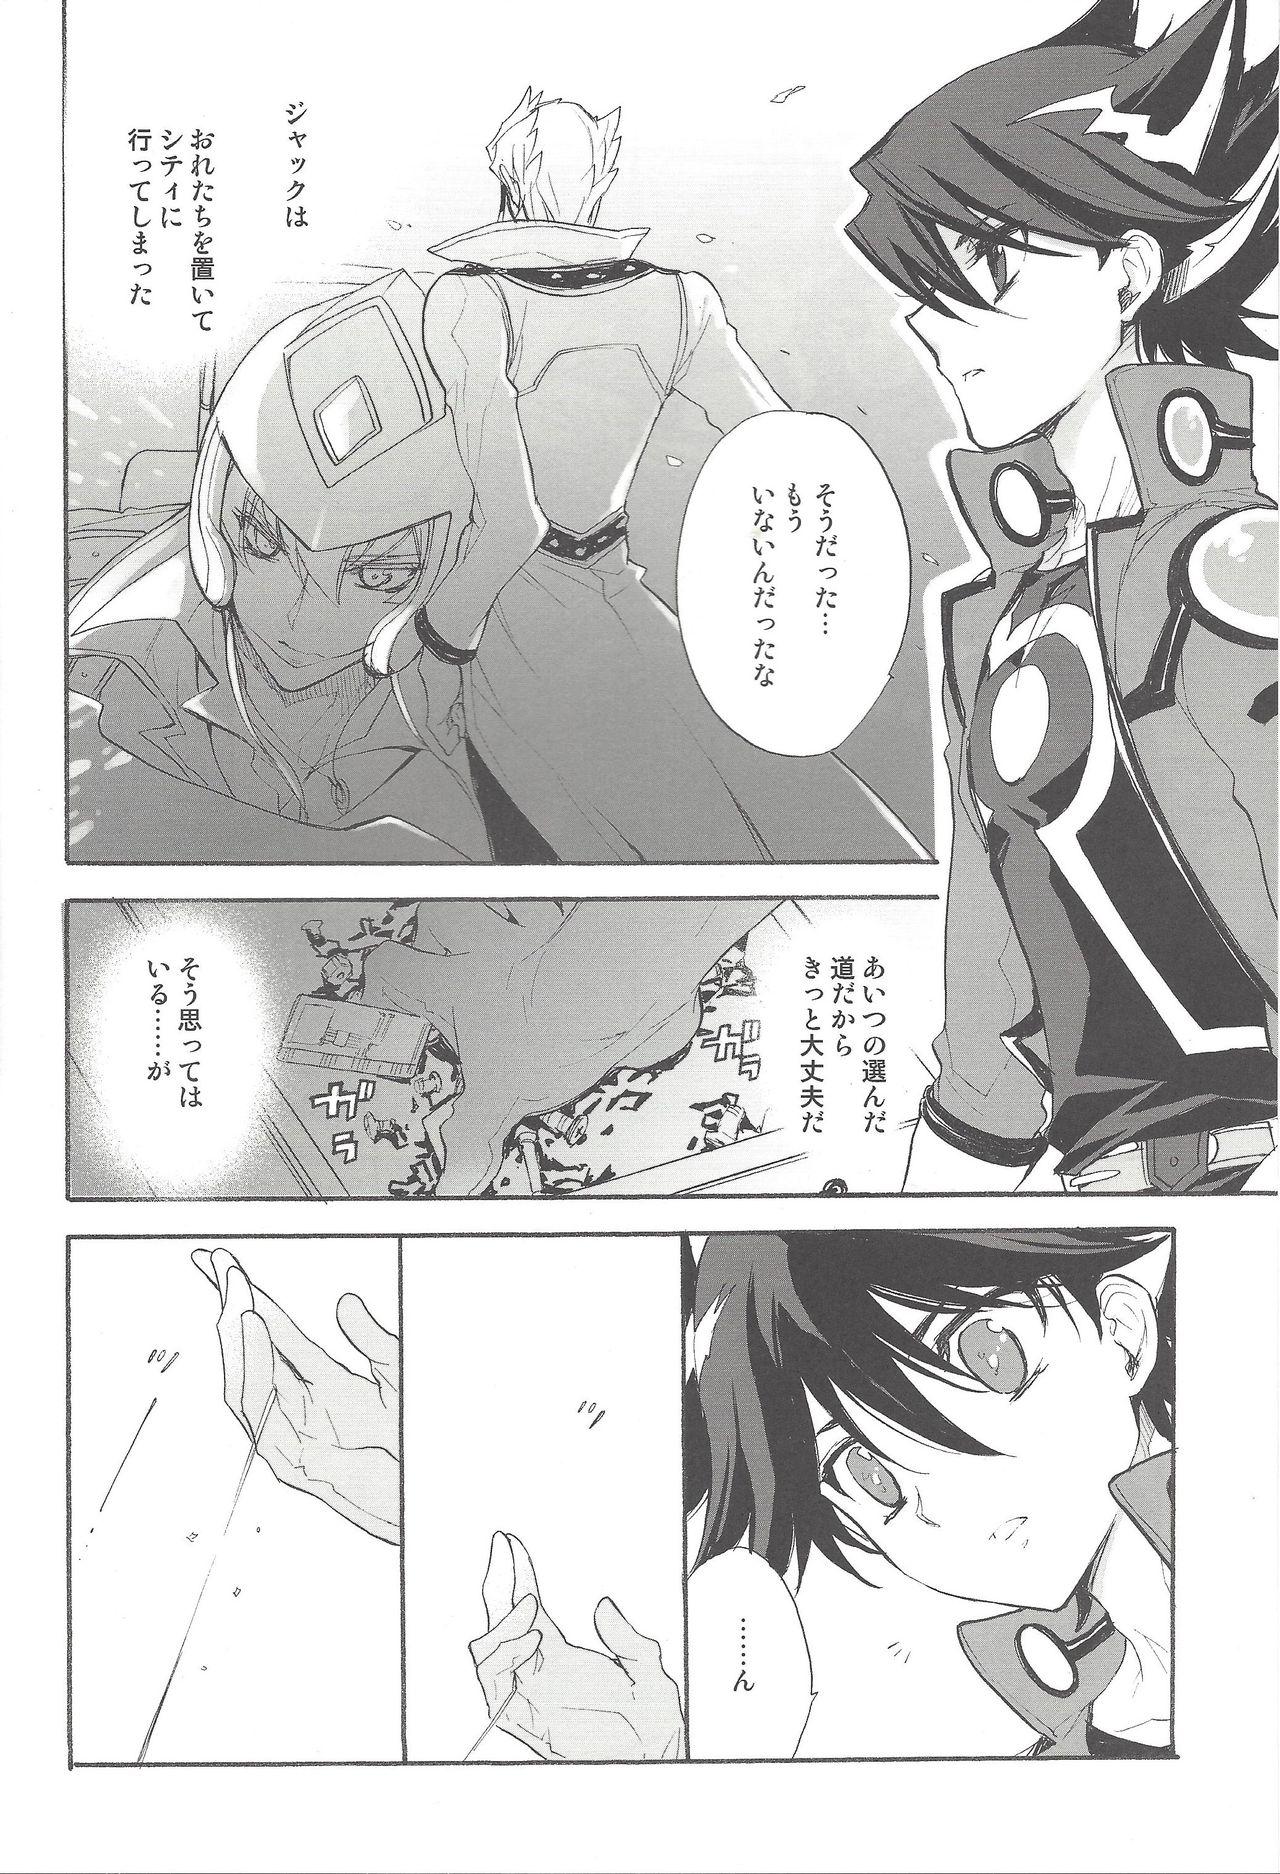 Sislovesme Hoshi no Love Letter - Yu-gi-oh 5ds Soles - Page 7